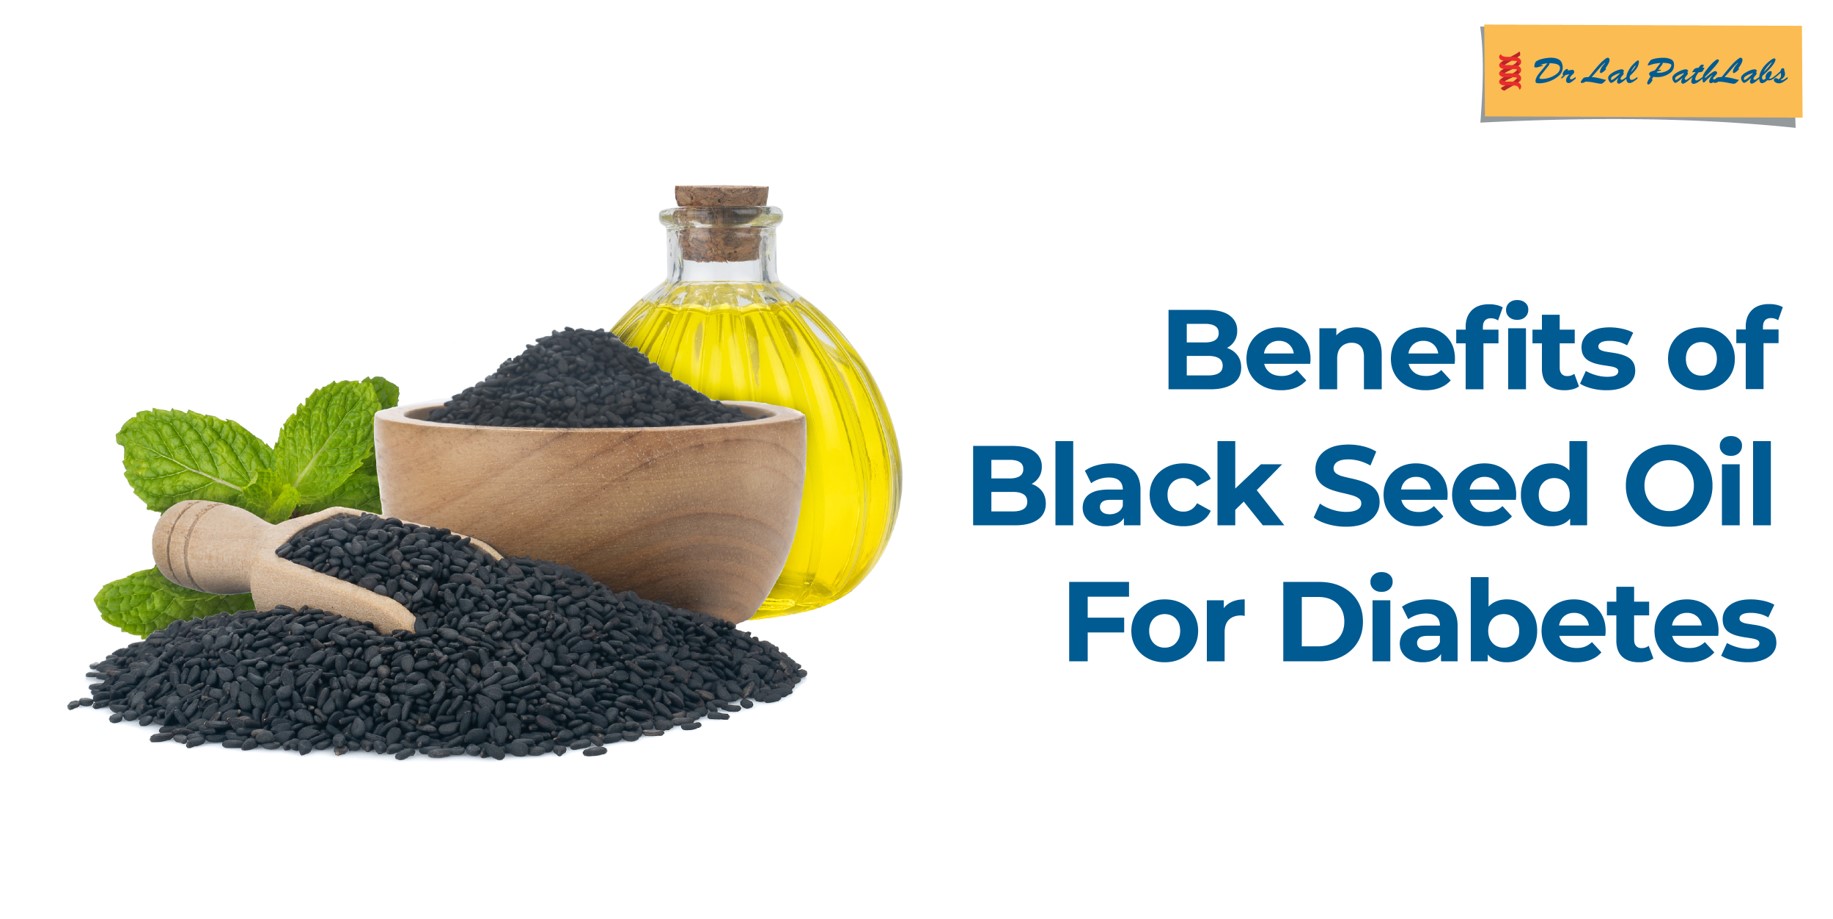 Black Seed Oil: Uses, Benefits, Side Effects, and Dosage